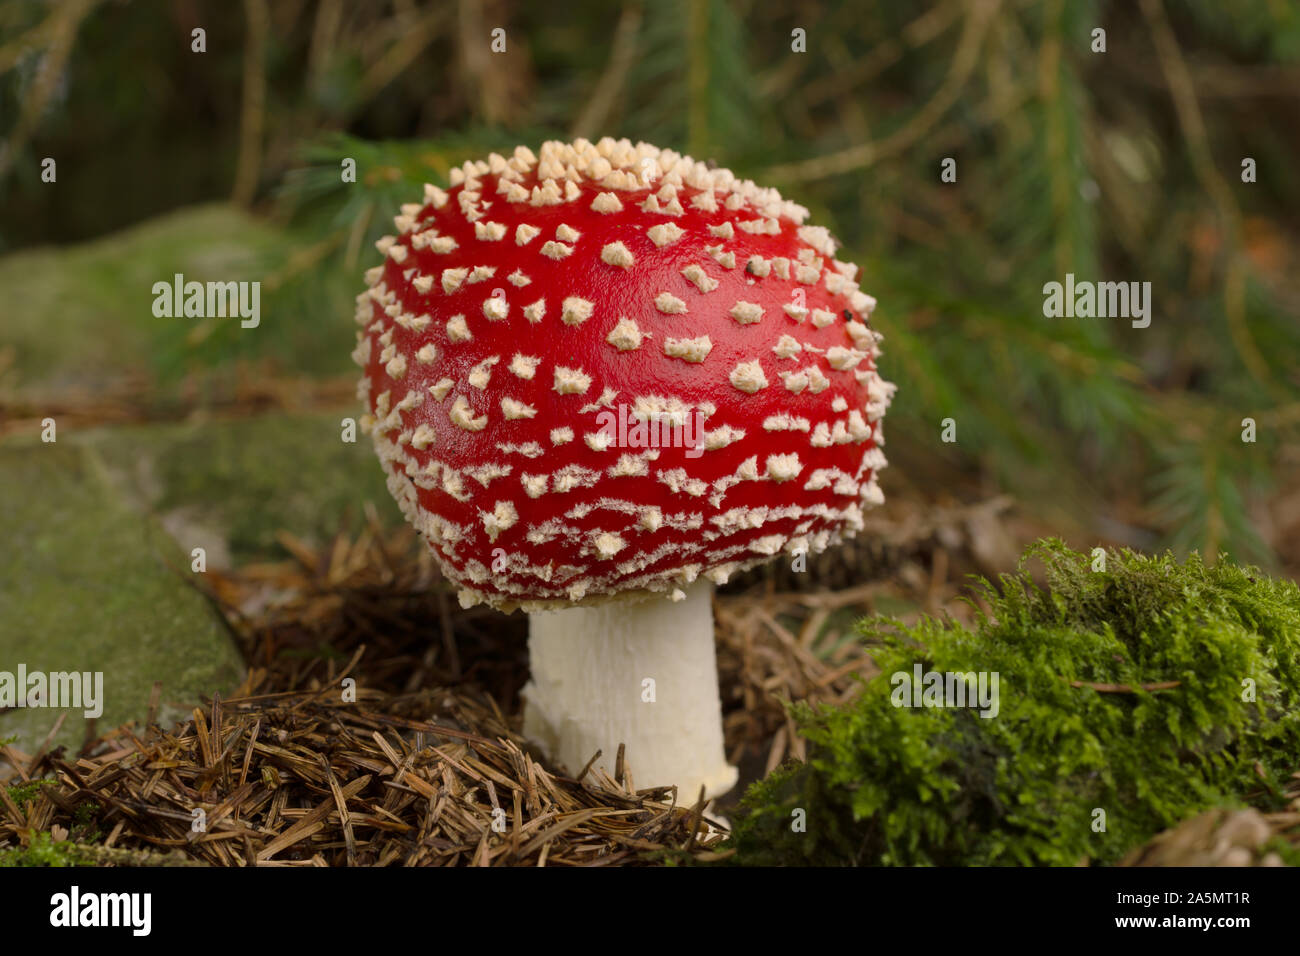 Fly Agaric or Amanita muscaria a poisonous mushroom with a red cap and white spots common in coniferous and mixed forests Stock Photo